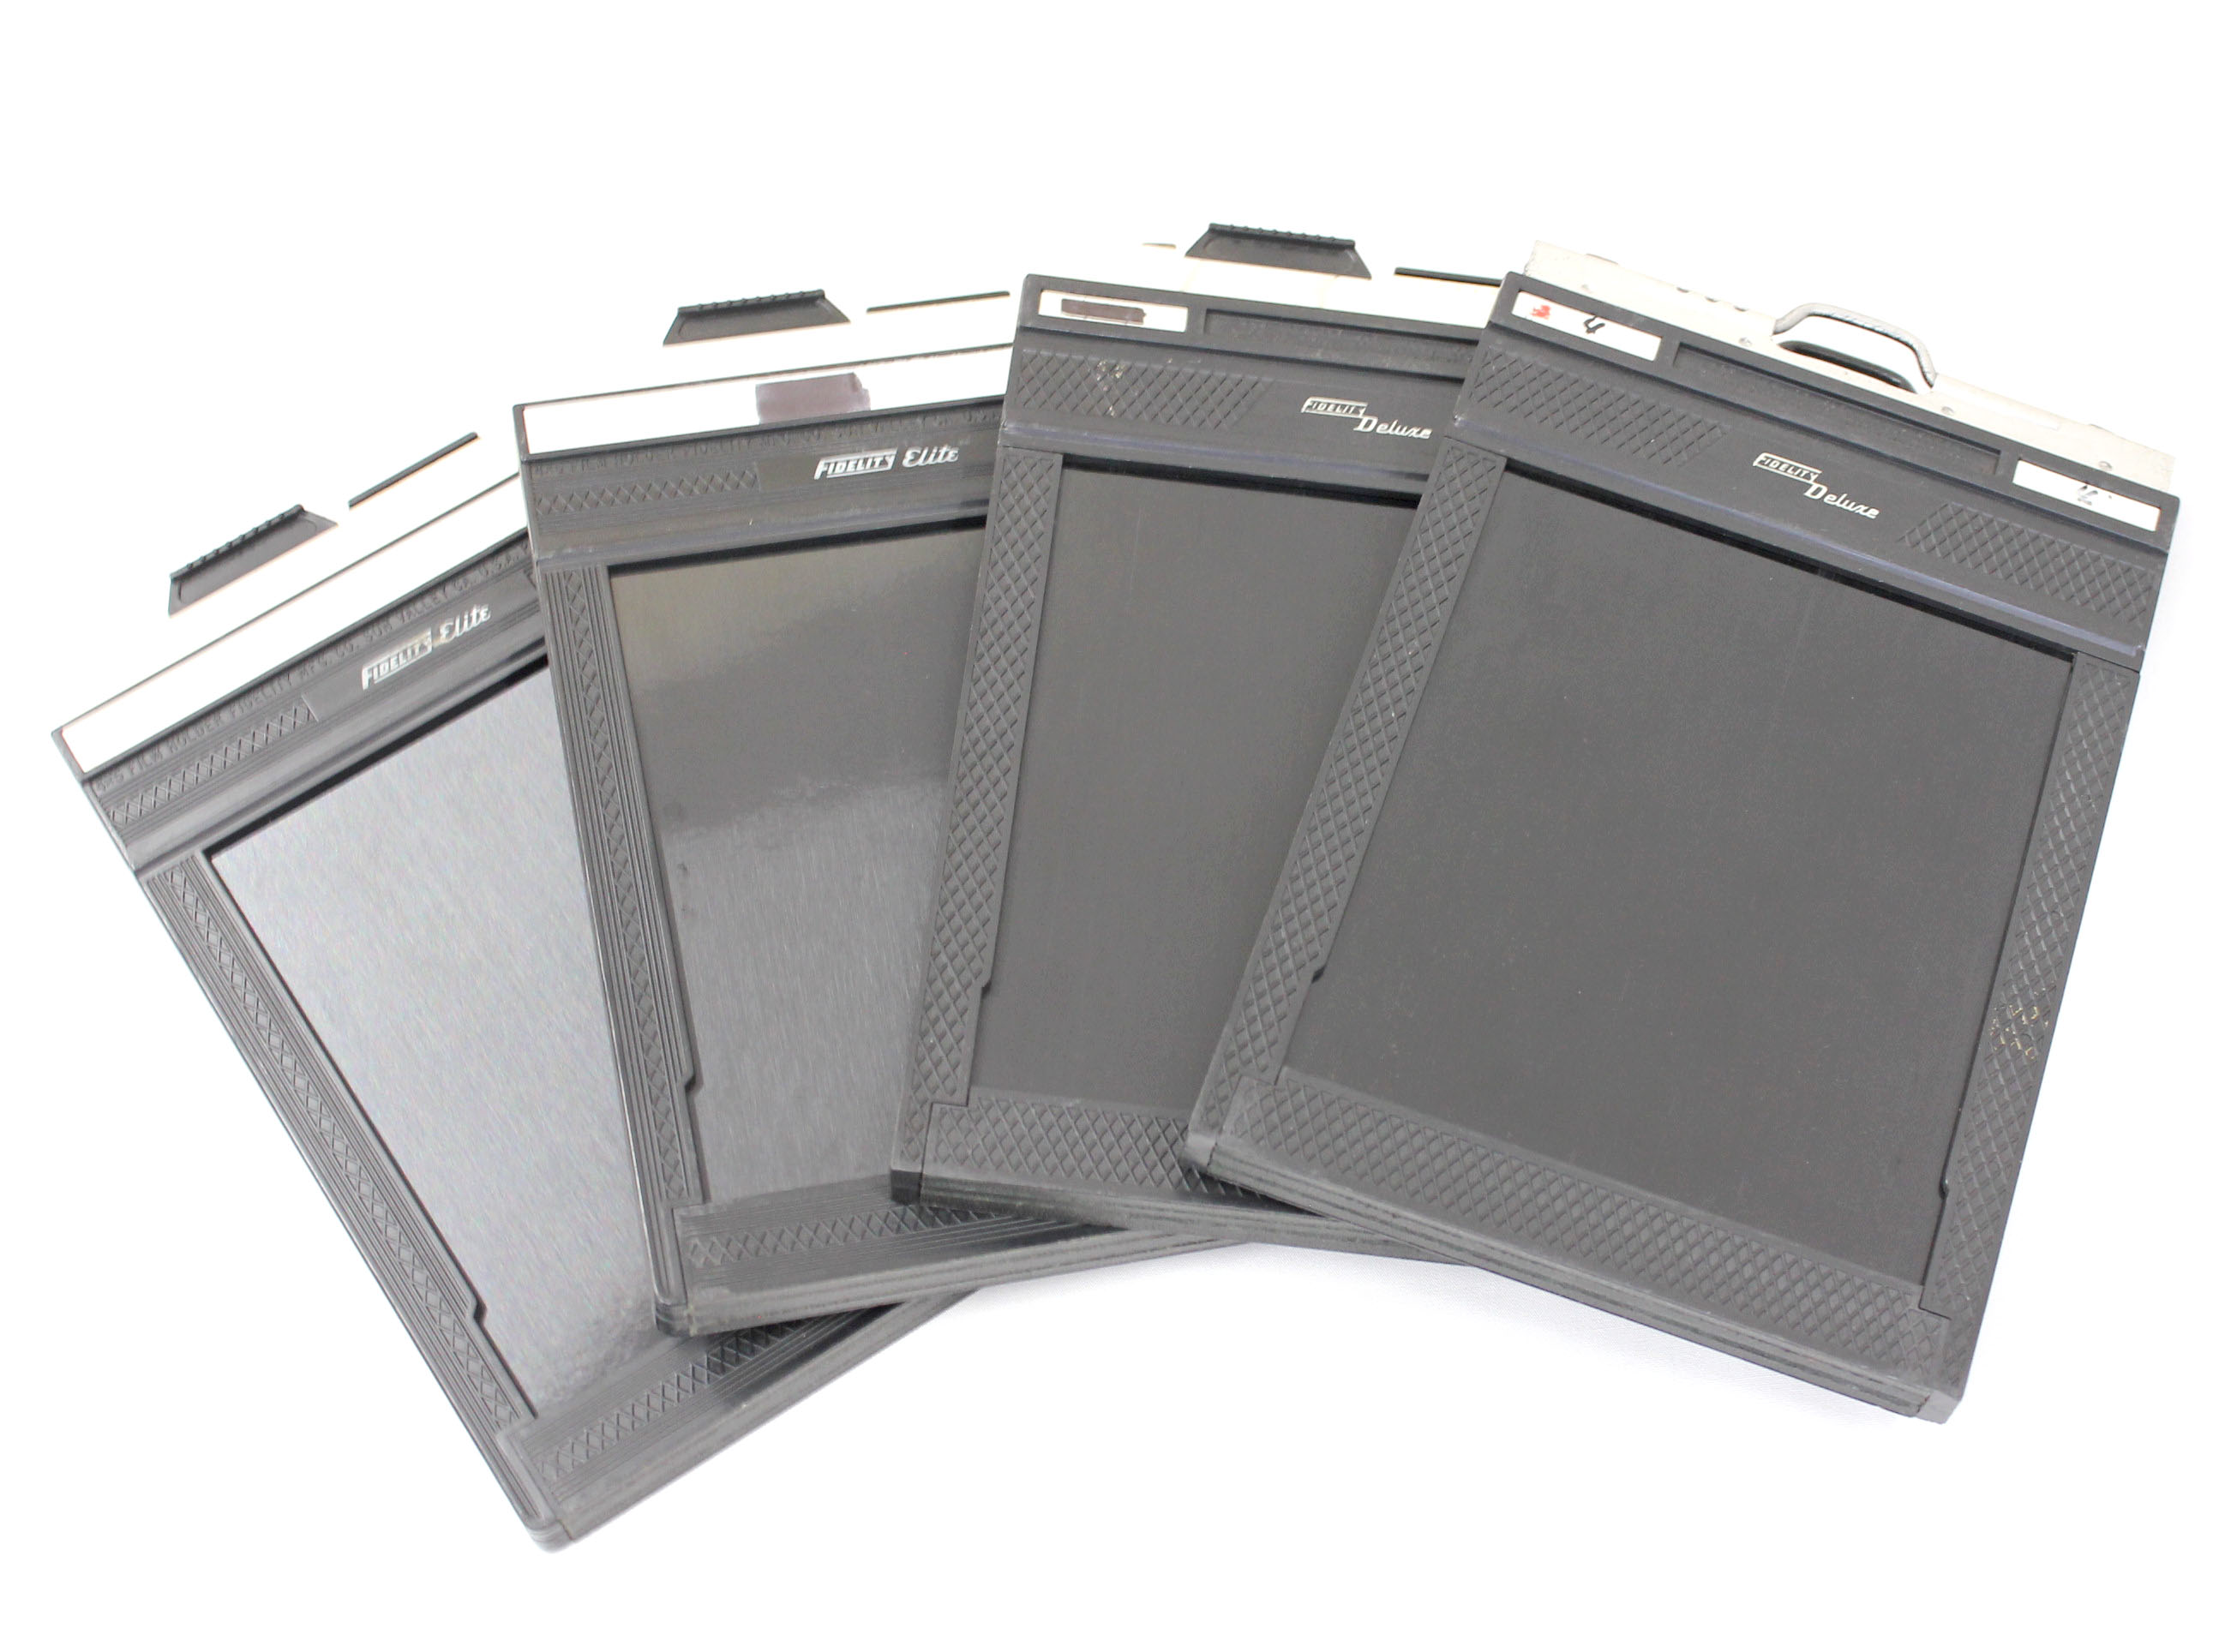 Japan Used Camera Shop | Fidelity Deluxe / Elite 4x5 Cut Sheet Film Holder Lot of 4 from Japan